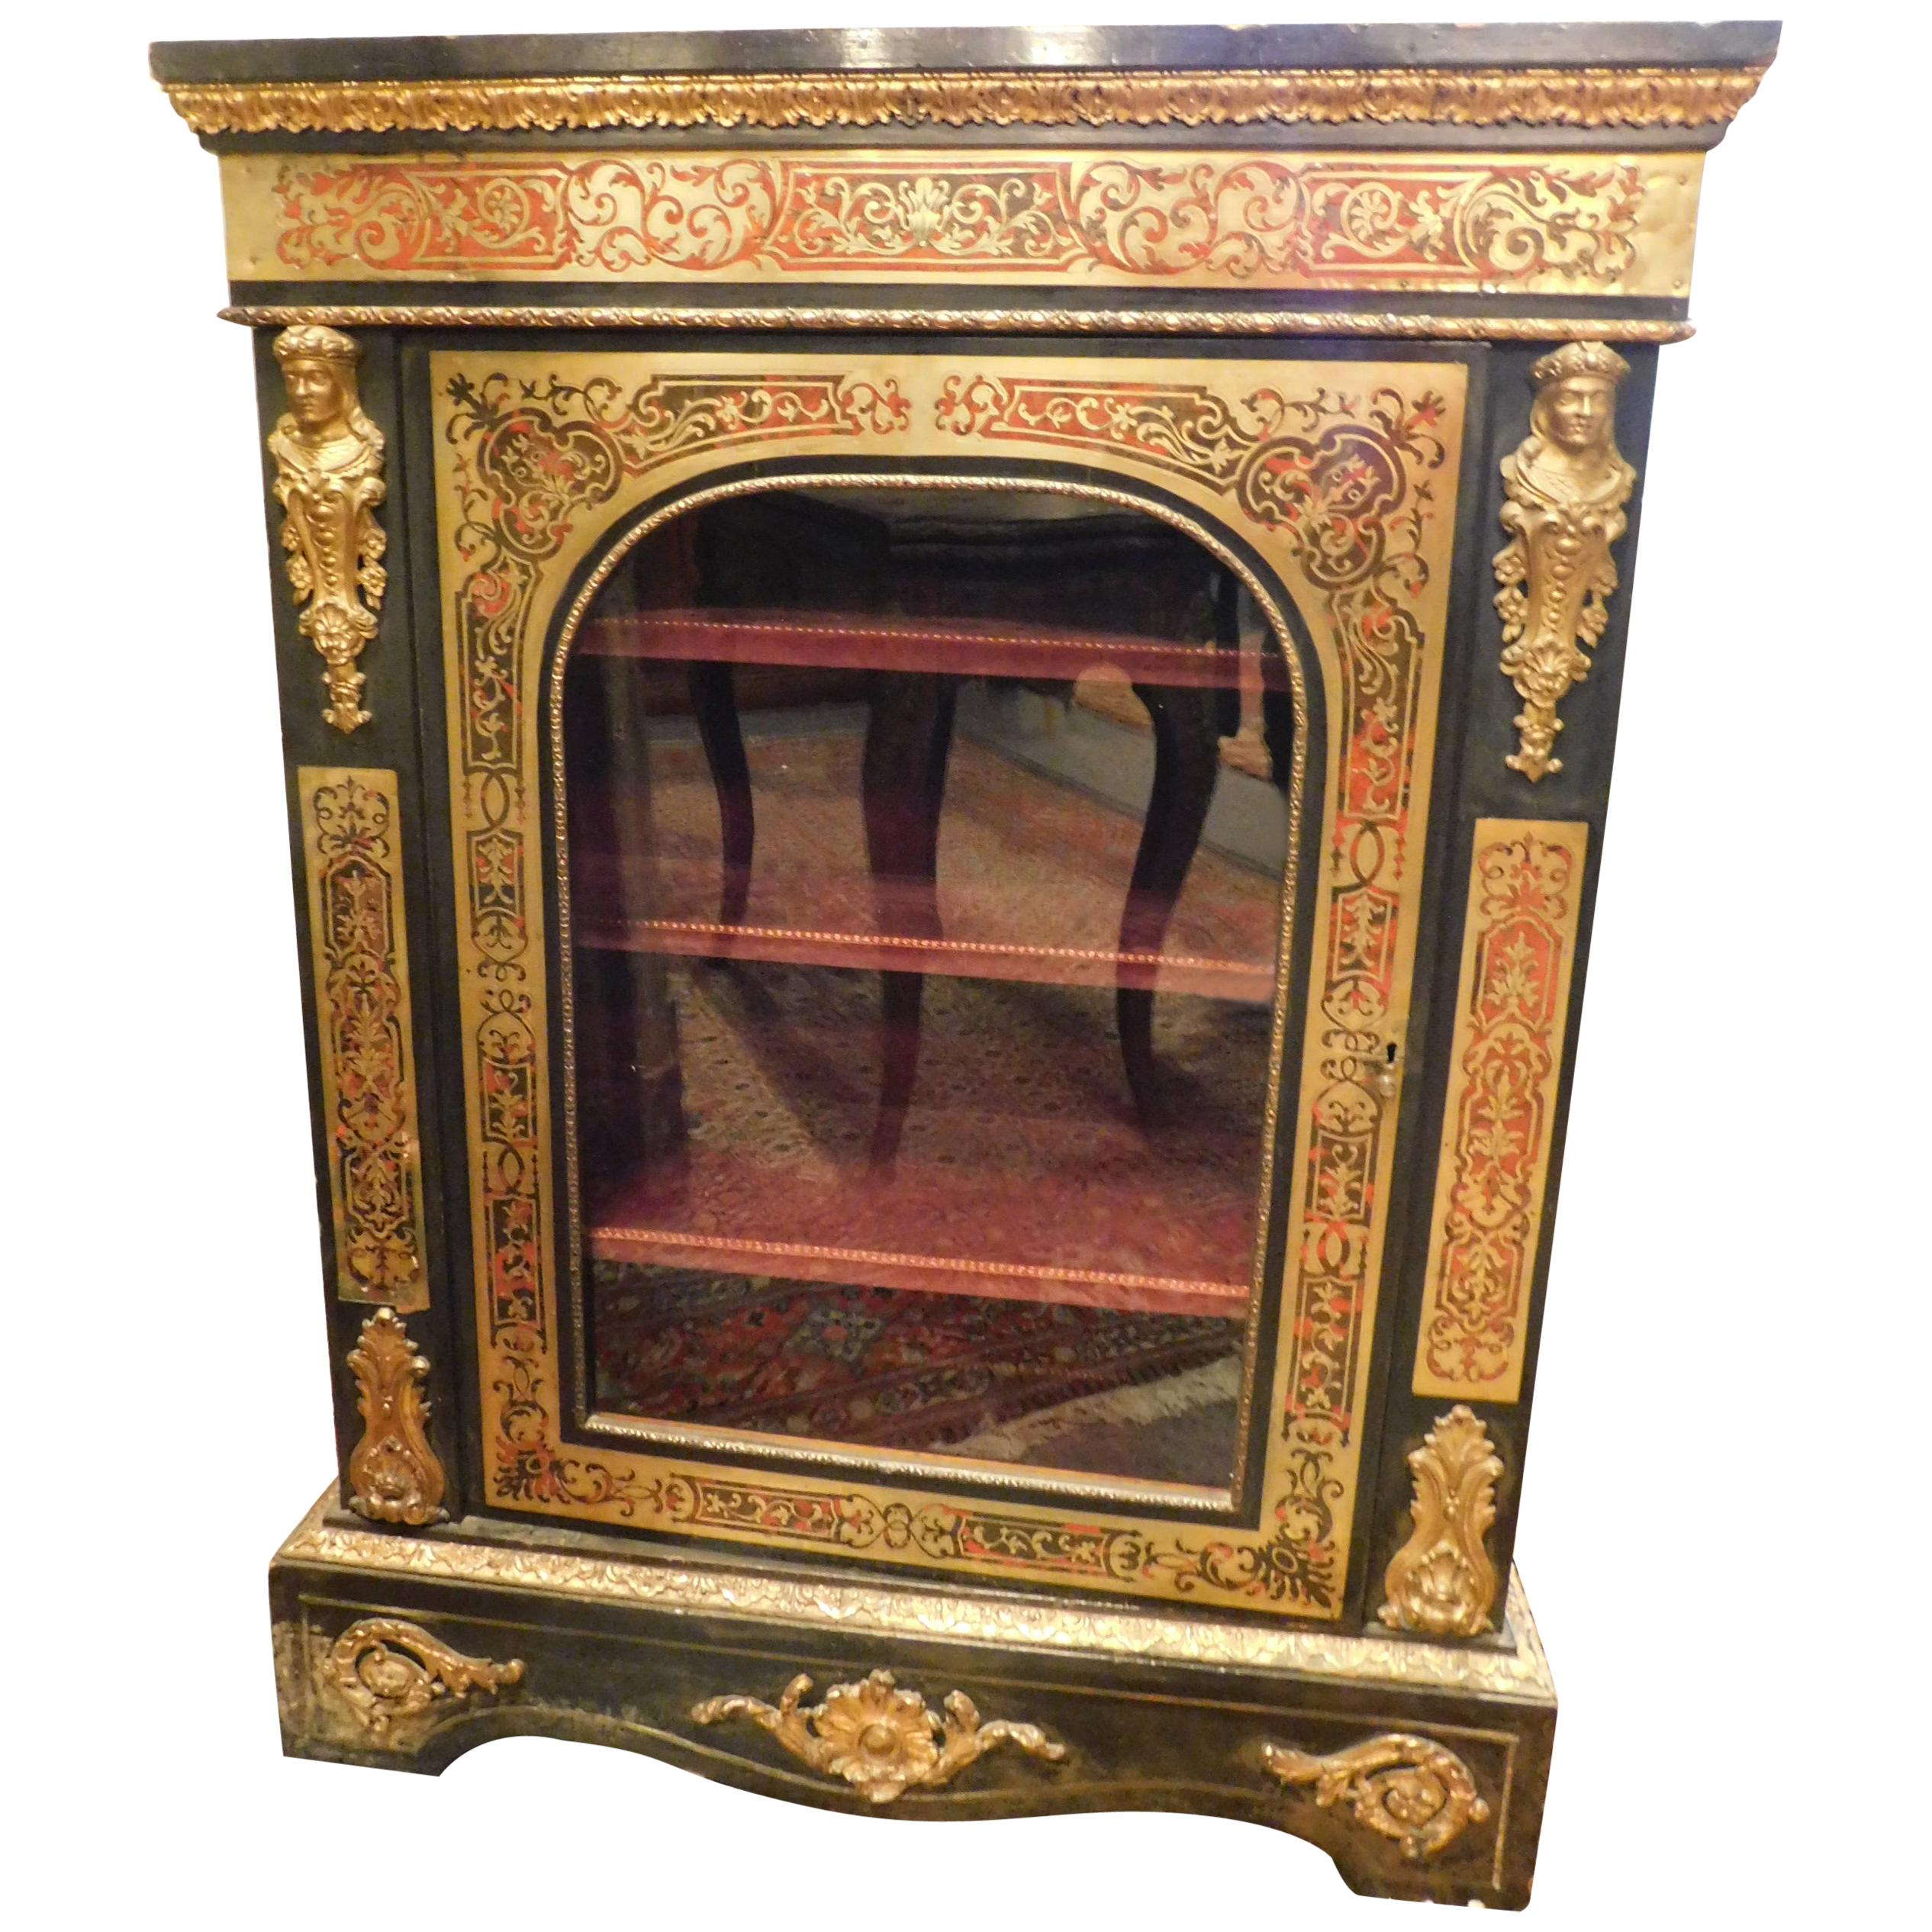 Antique Richly Decorated Showcase, Black Gold Brass Inlays, 1850, Italy